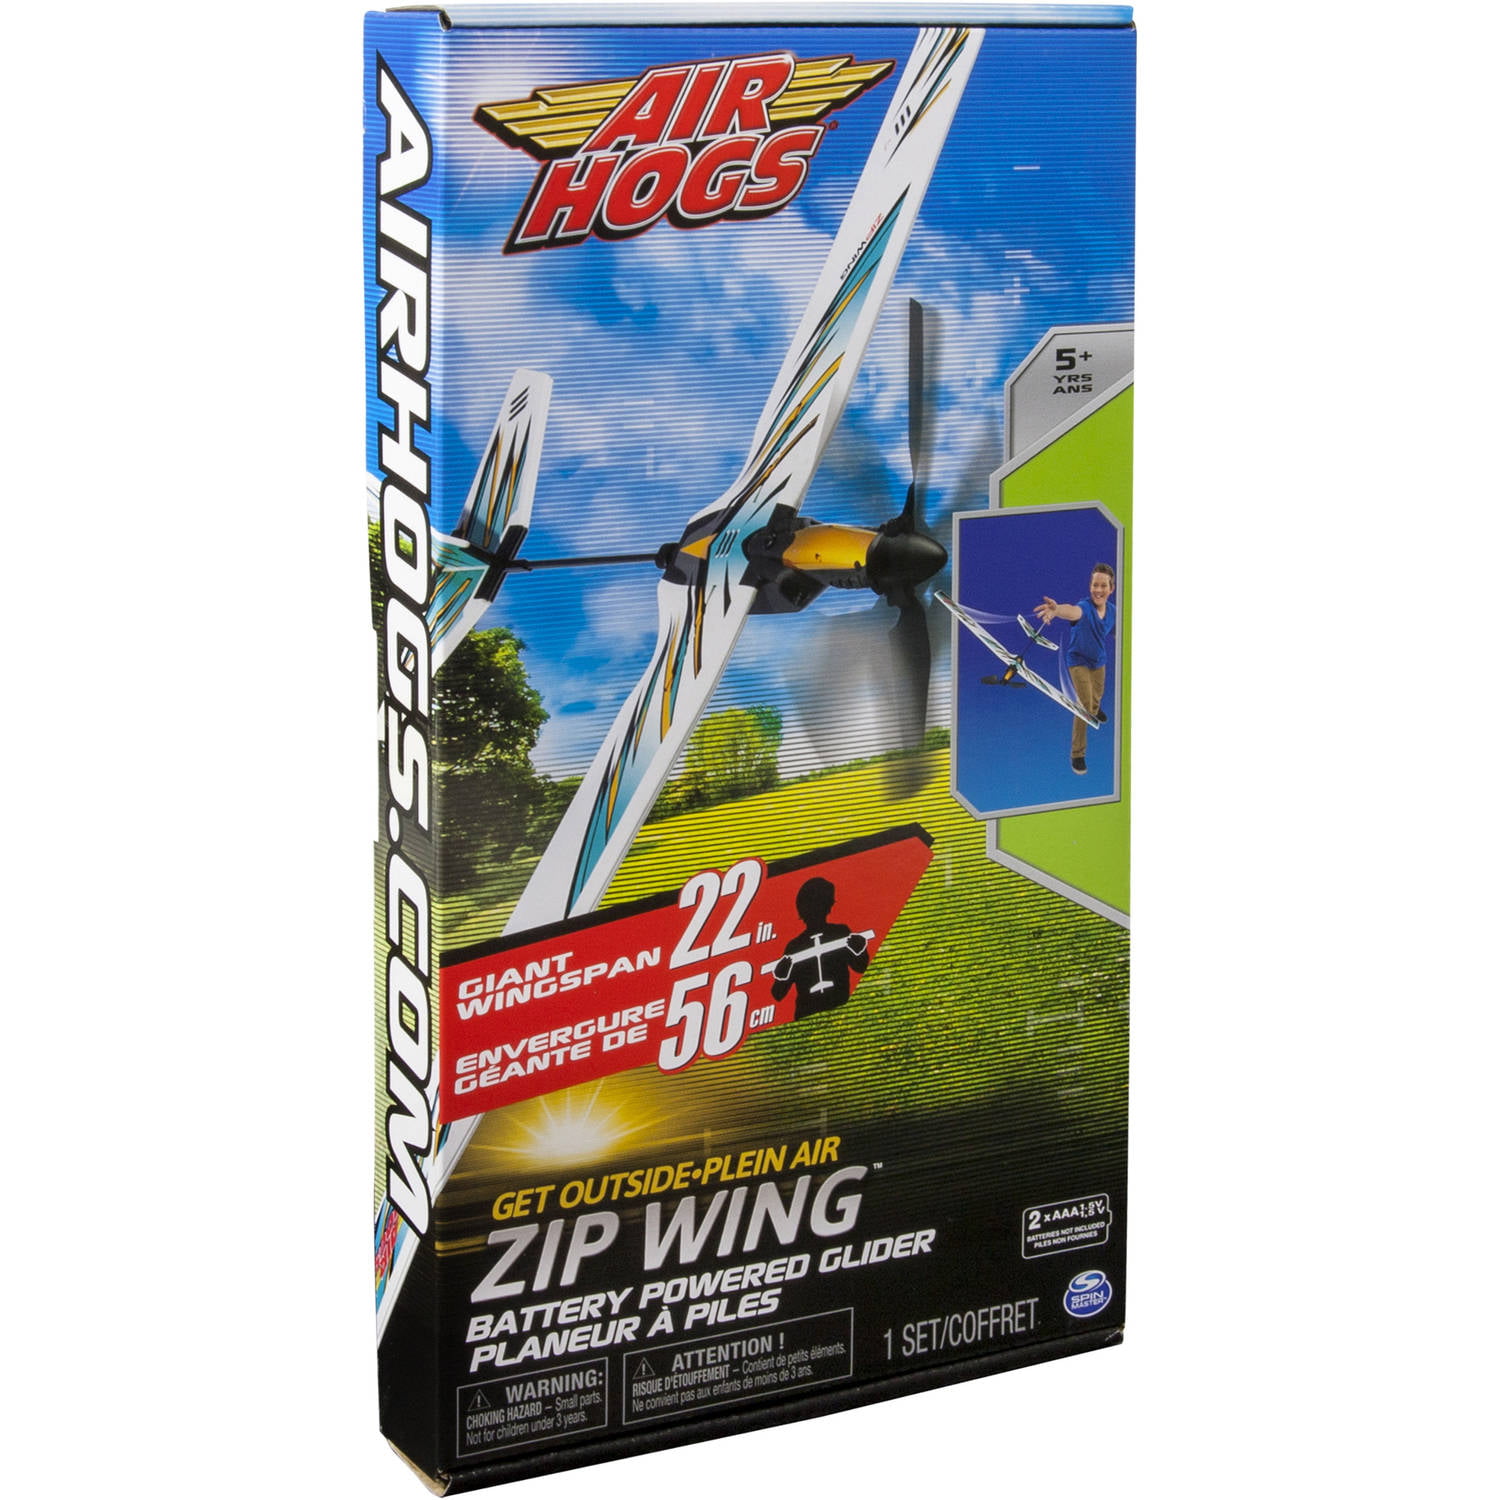 Details about   AIR HOGS ZIP WING BATTERY POWERED GLIDER BRAND NEW FREE USPS SHIPPING